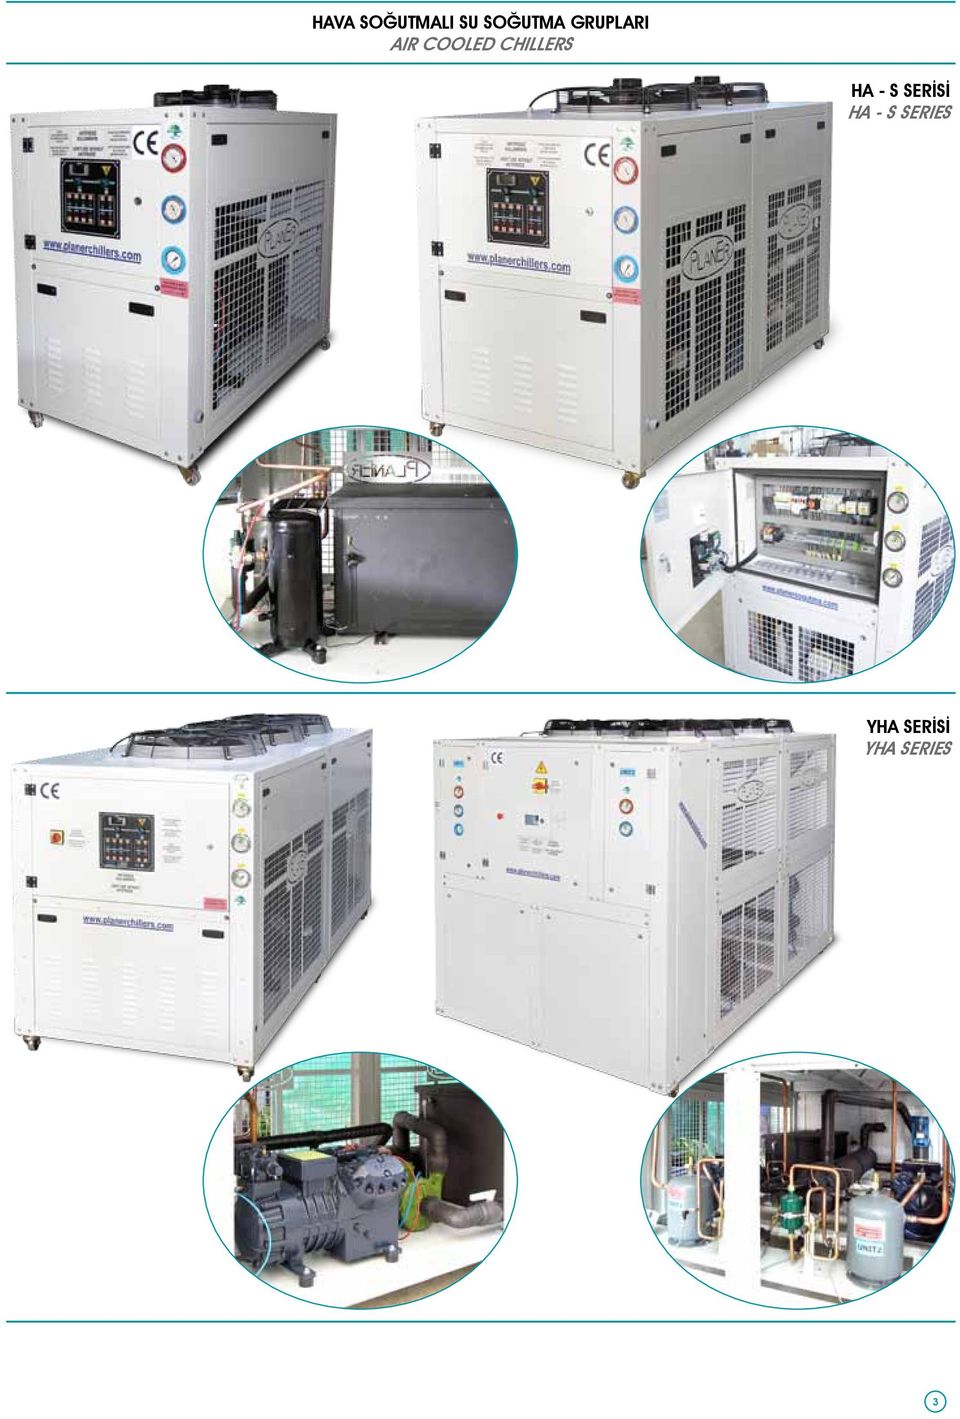 COOLED CHILLERS HA - S